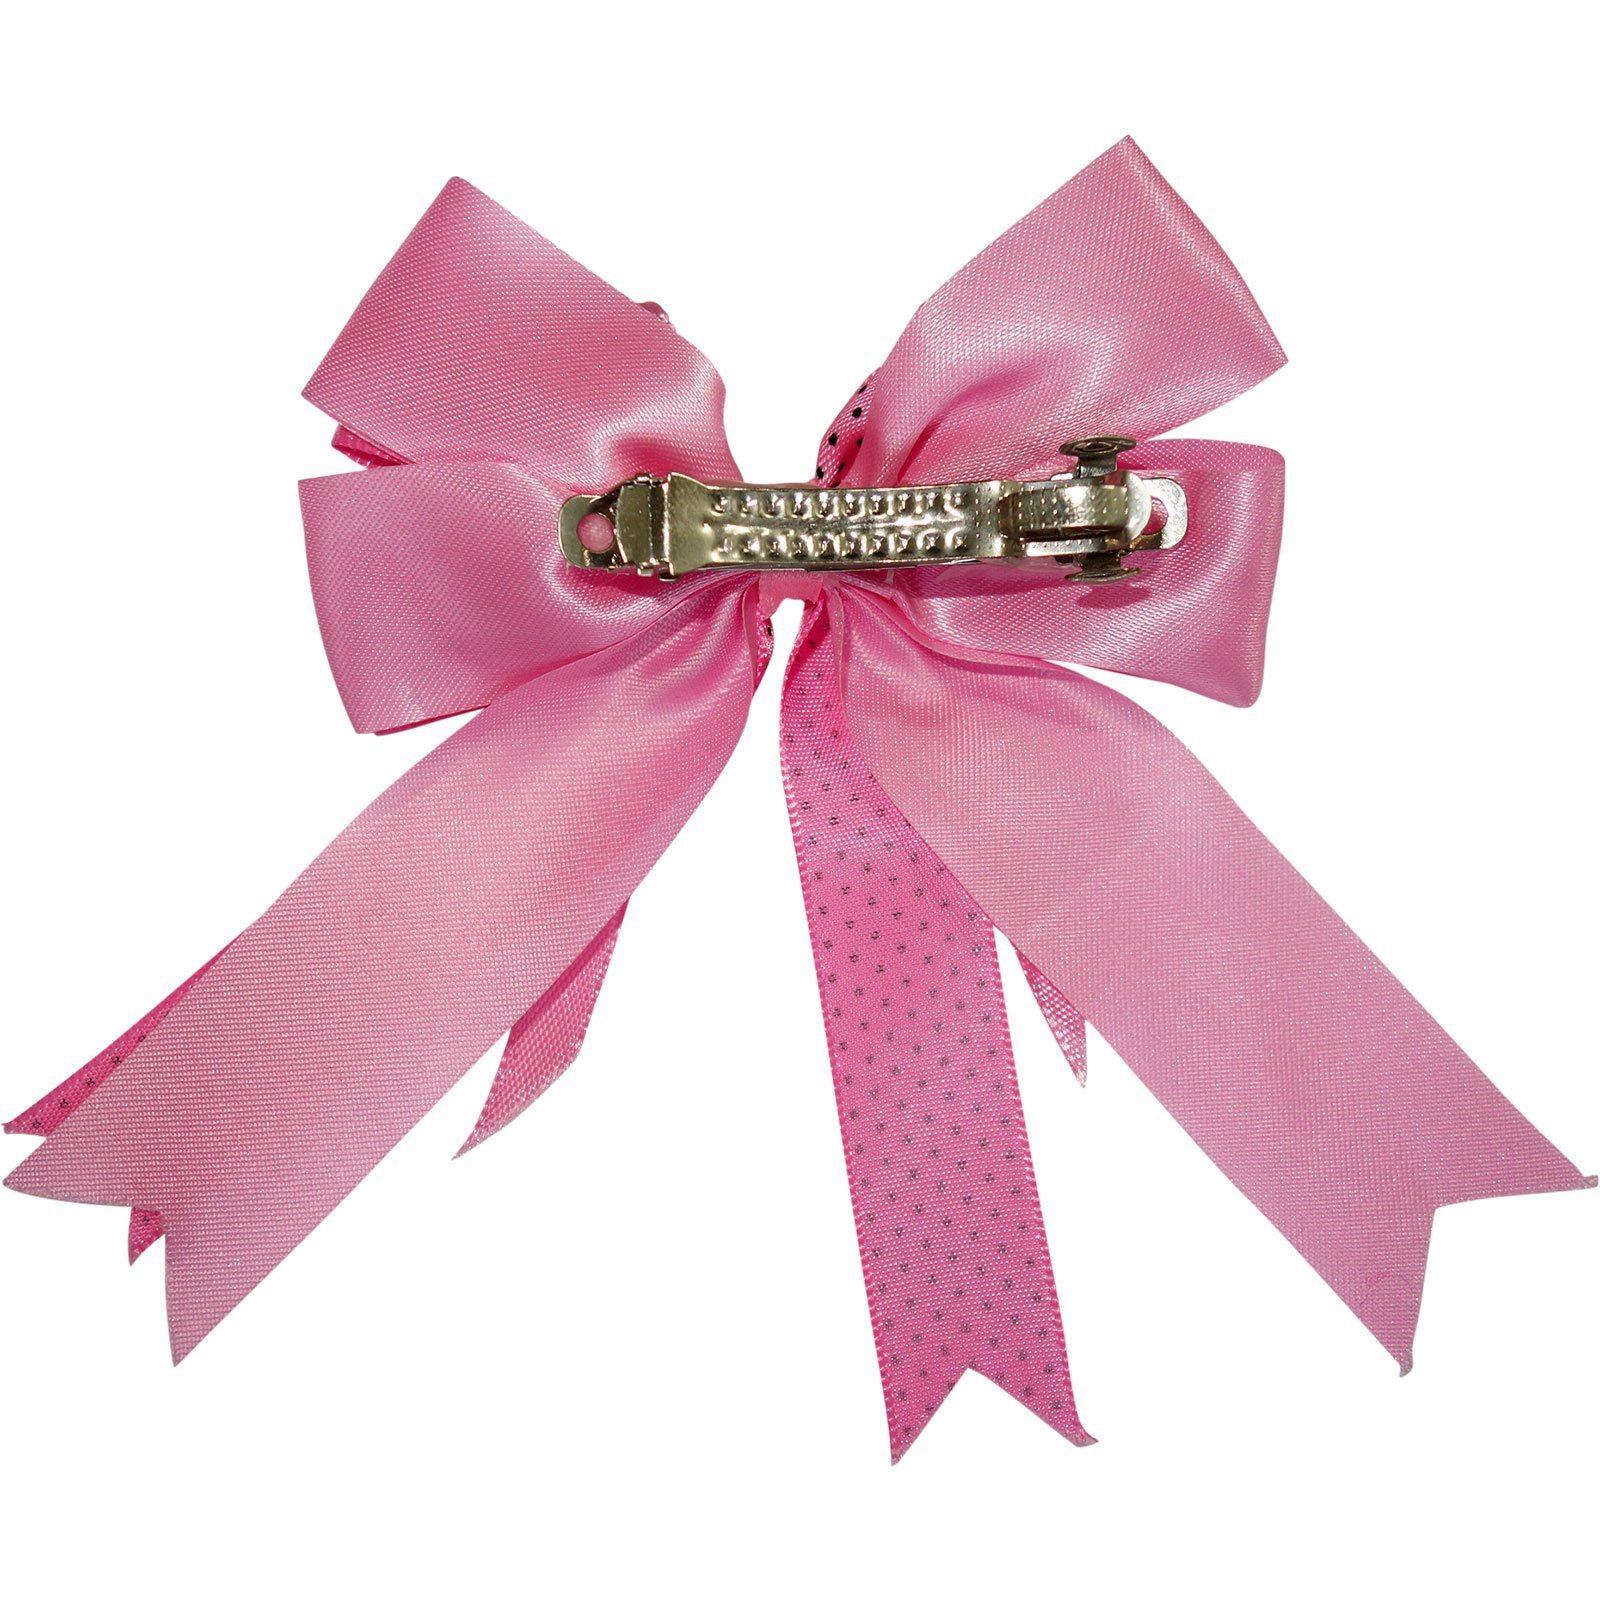 Pink Bow Hair Clip Ribbon Grip Clasp Barrette Girls Childrens Kids Accessories